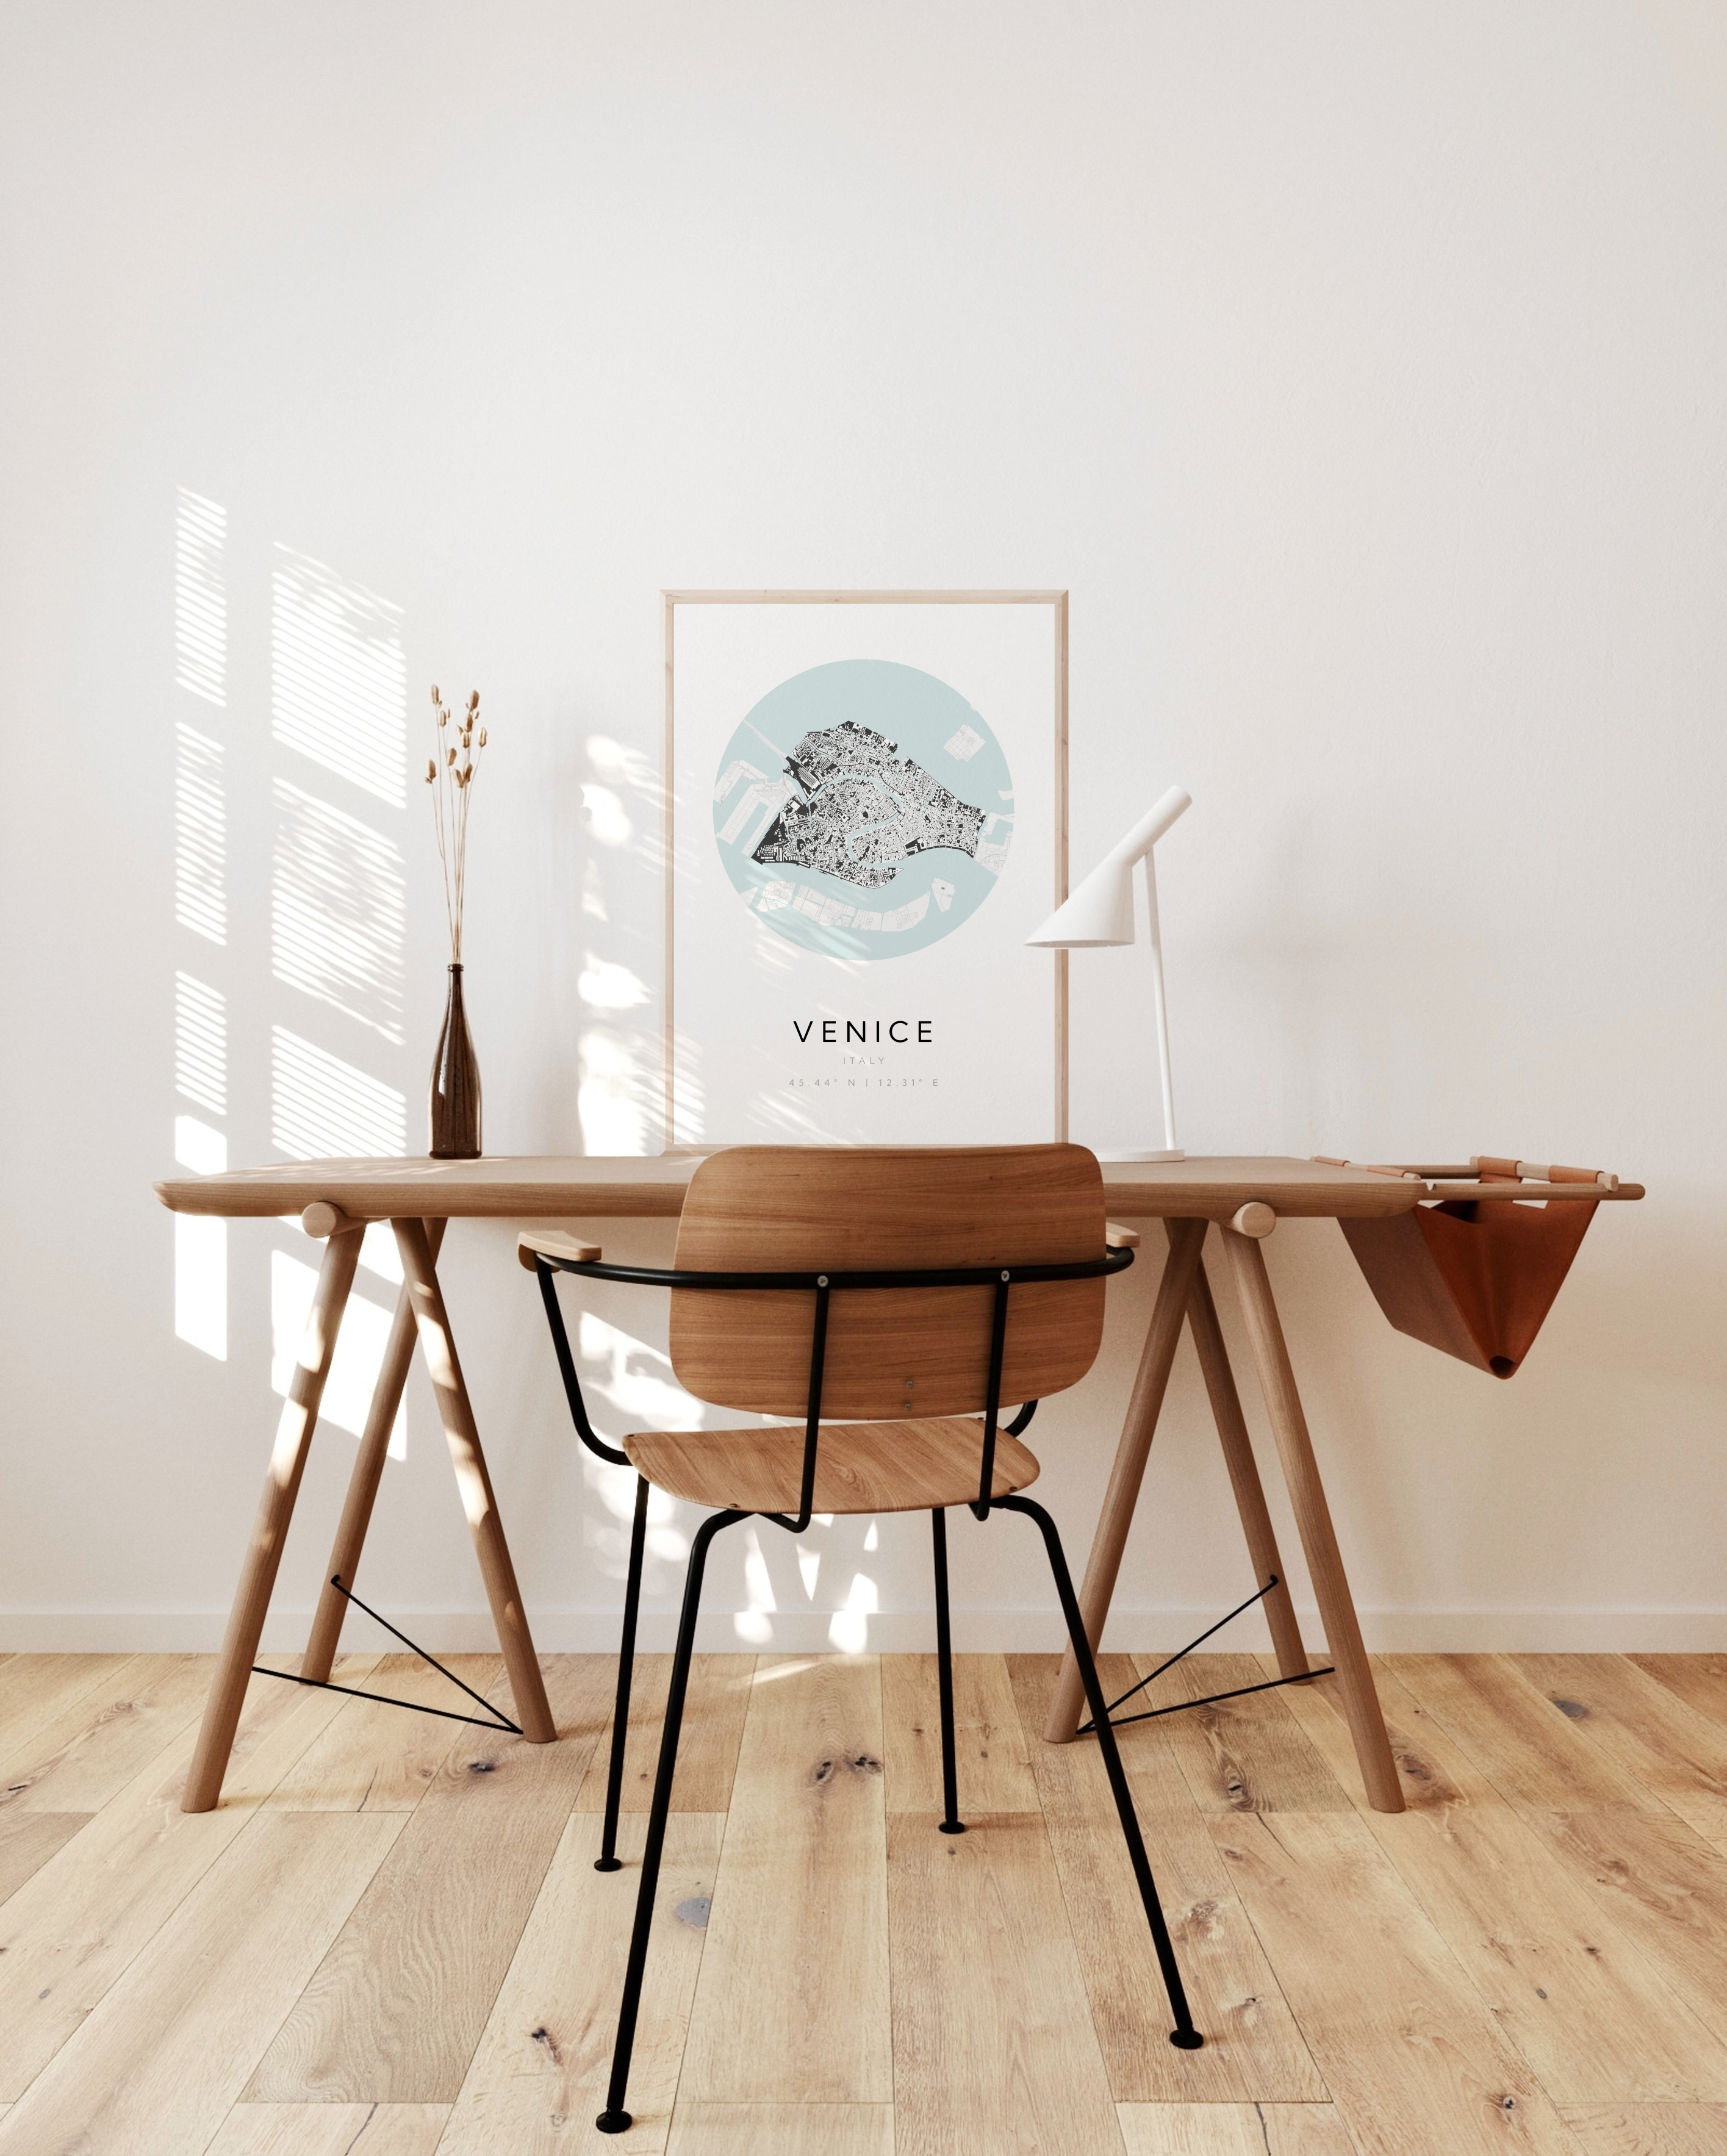 A Venice poster sitting on top of a wooden desk placed against a white wall.